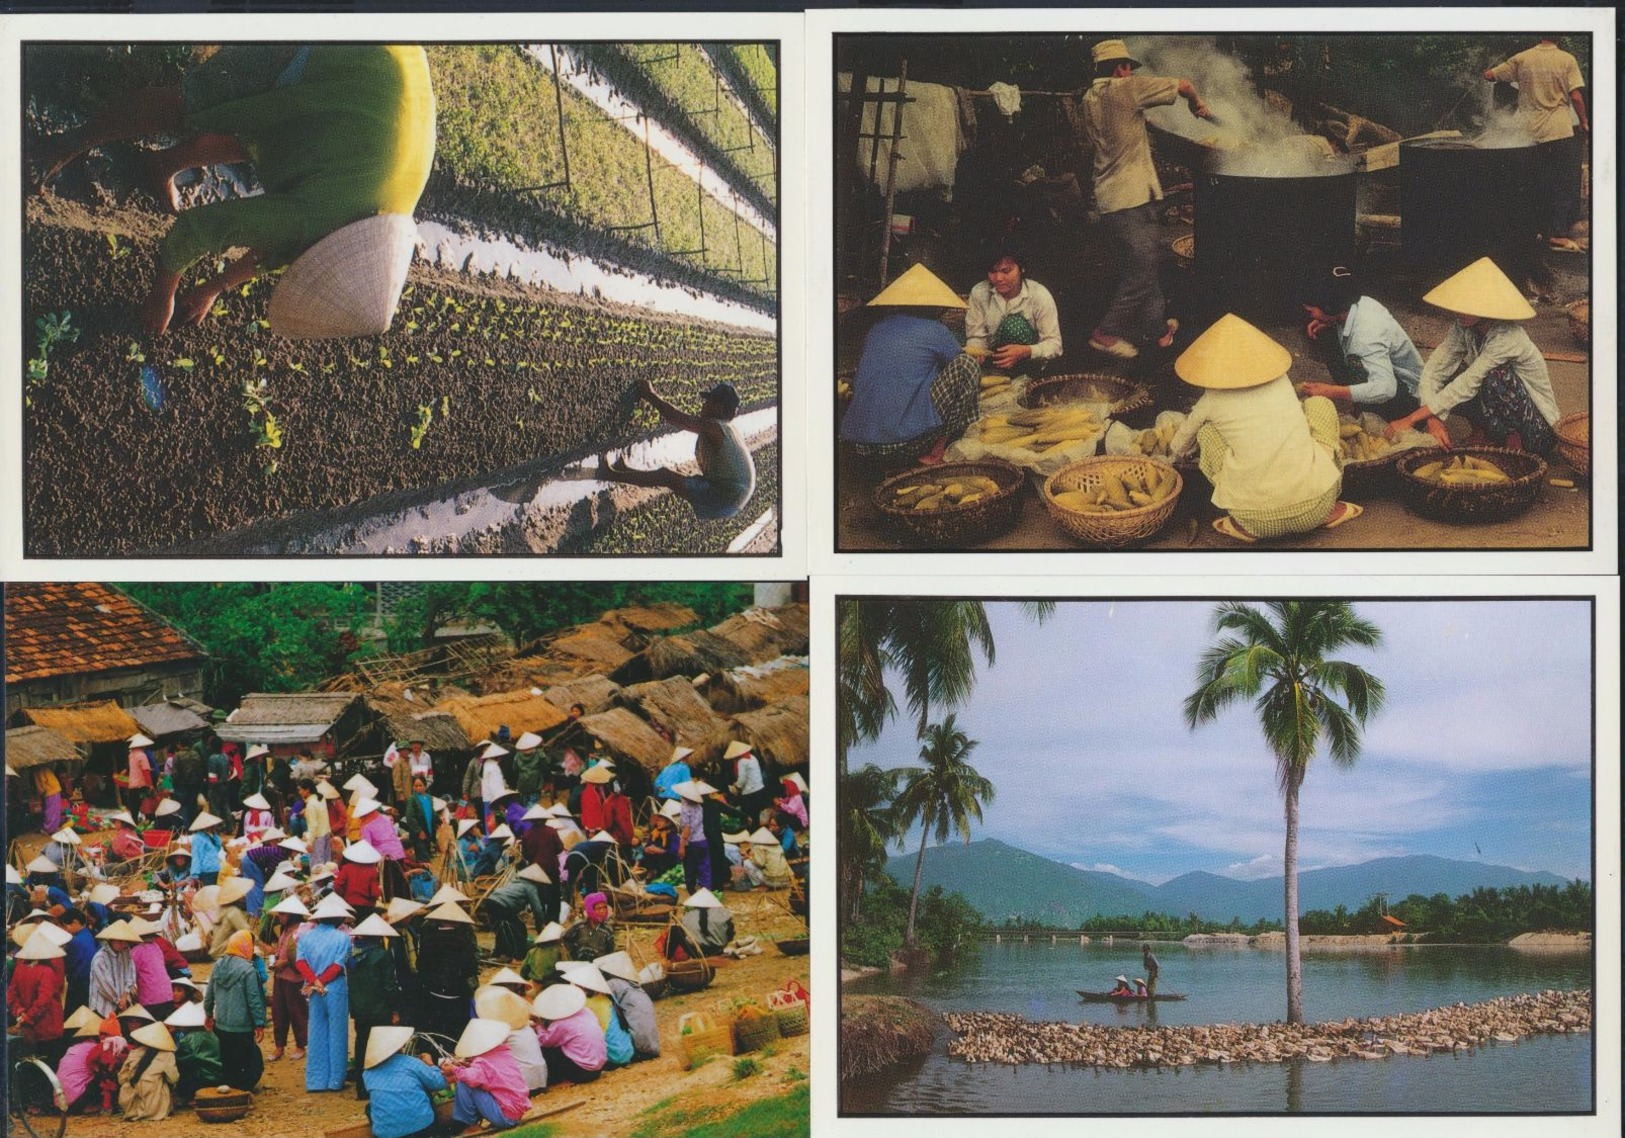 °°° CARNET 4 POSTCARDS - THAILAND - DAILY LIFE IN THE SUBURB OF NHA TRANG CITY °°° - Thaïland